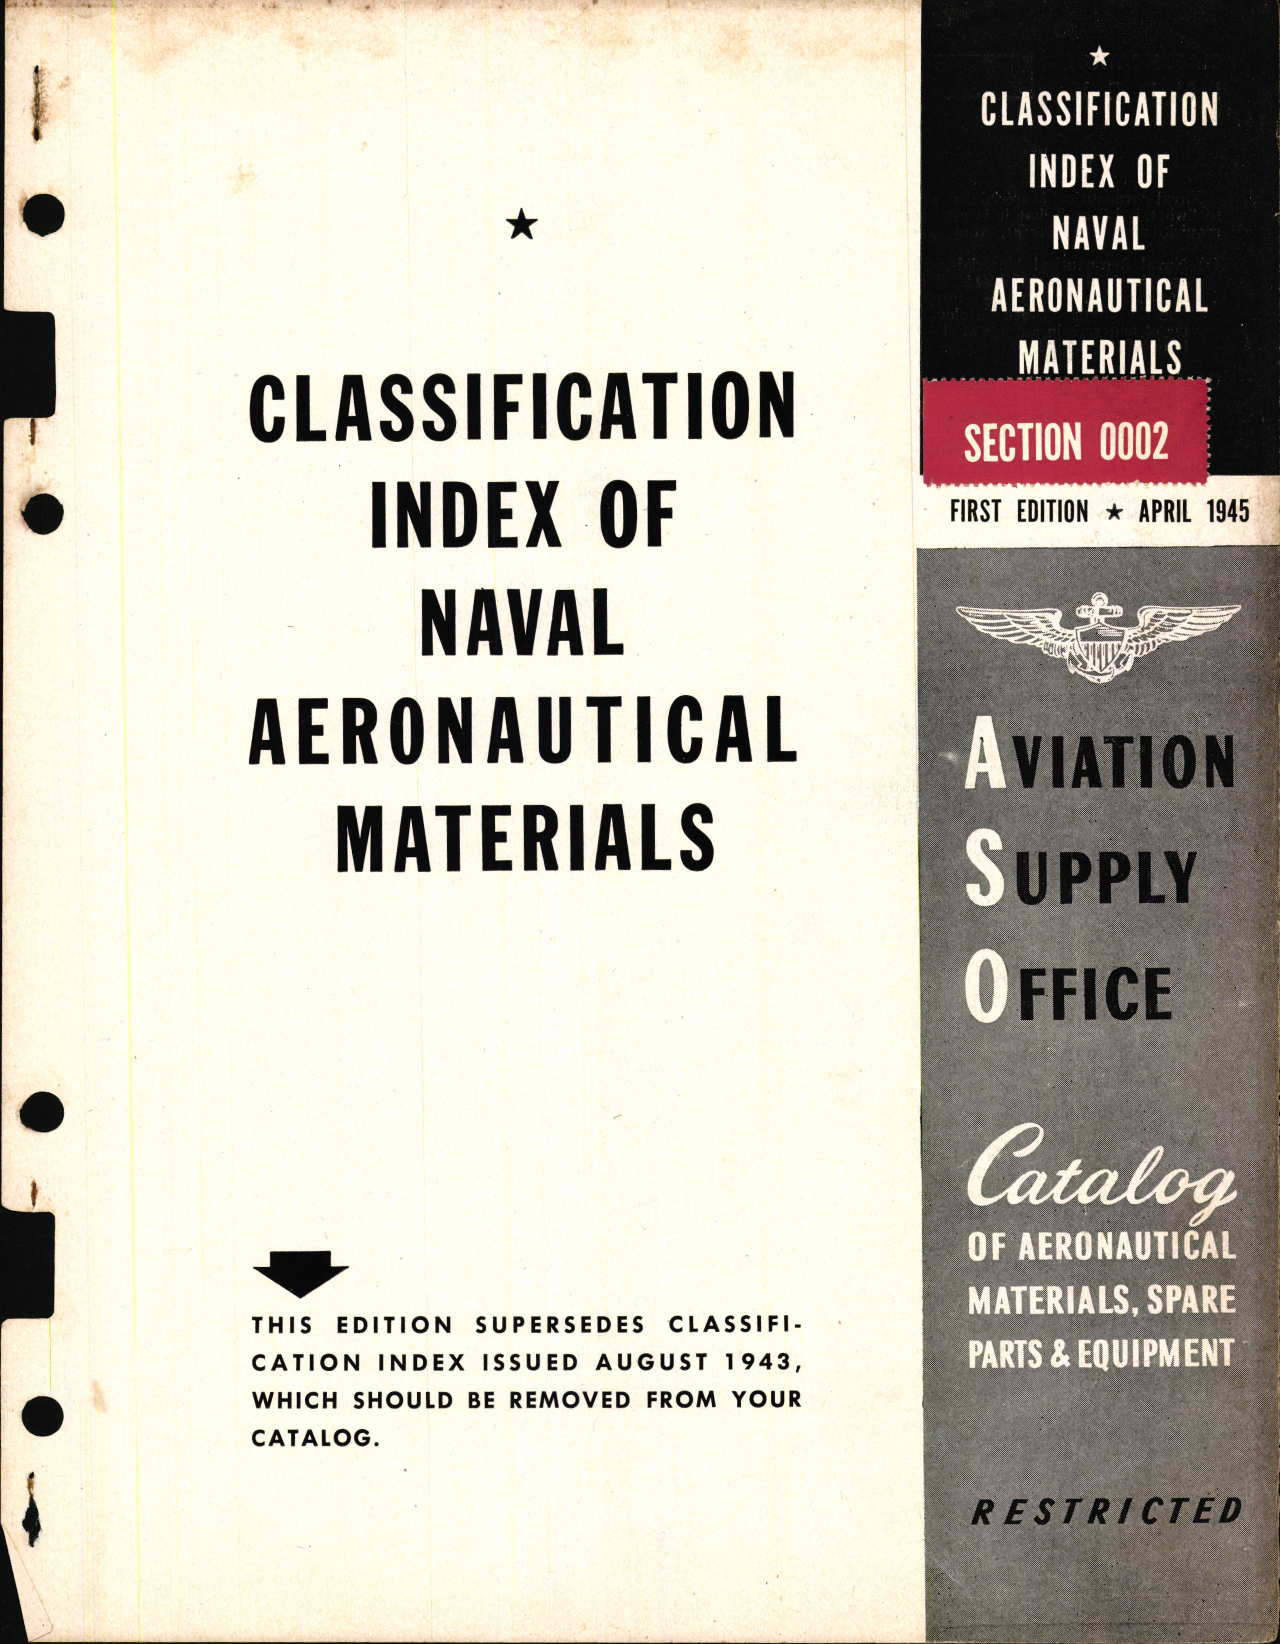 Sample page 1 from AirCorps Library document: Classification Index of Naval Aeronautical Materials